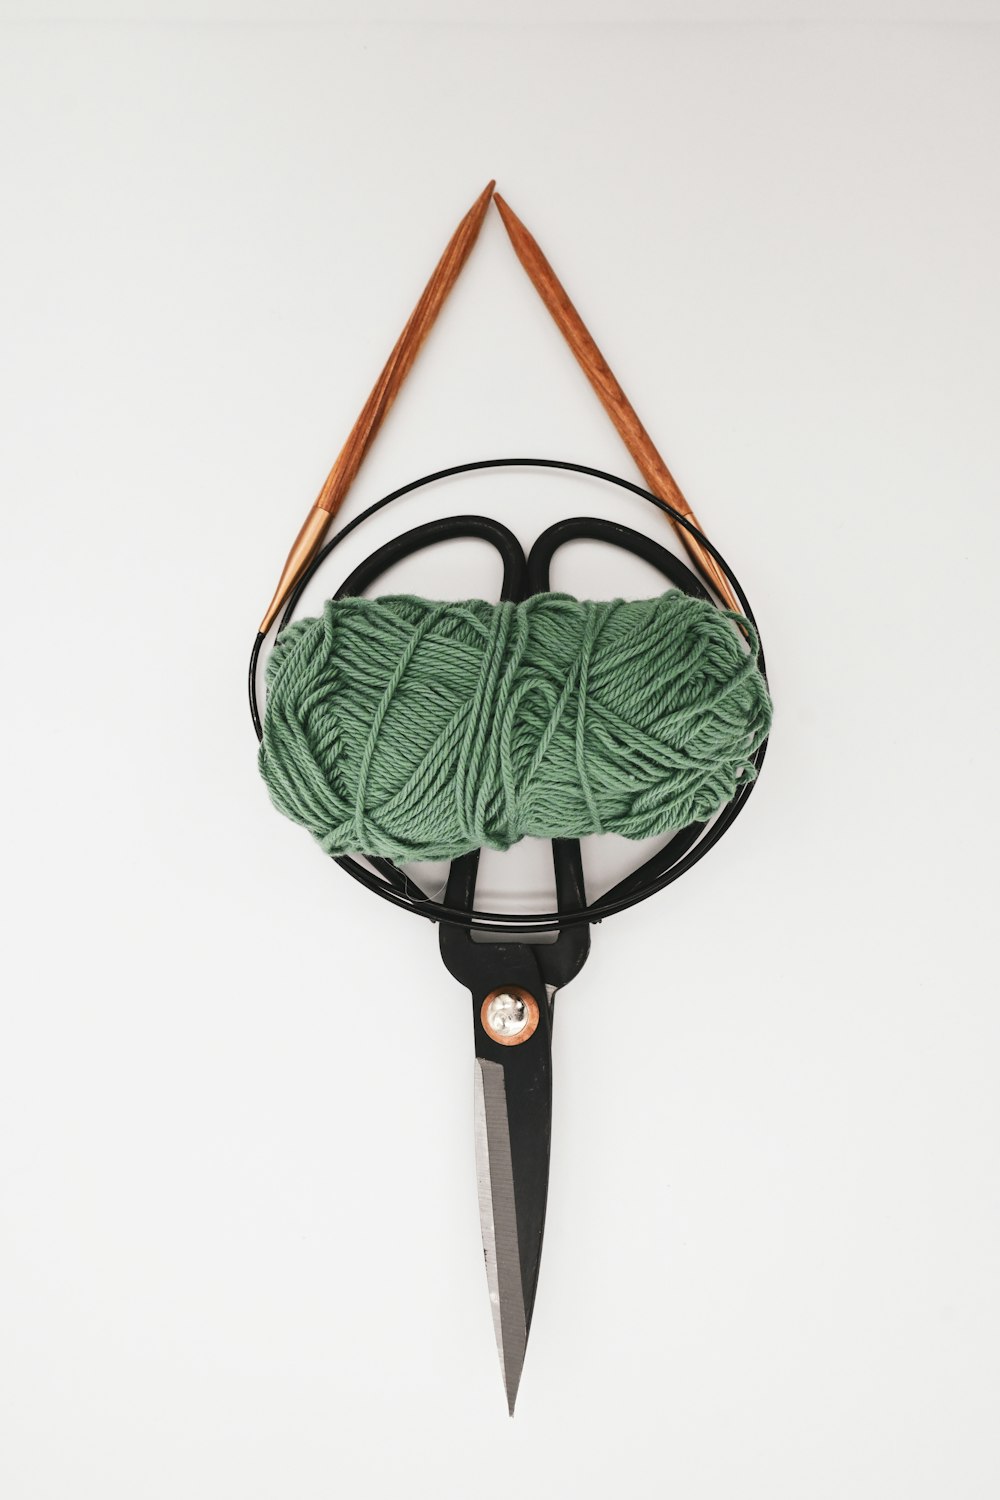 a pair of scissors and a ball of yarn on a hook